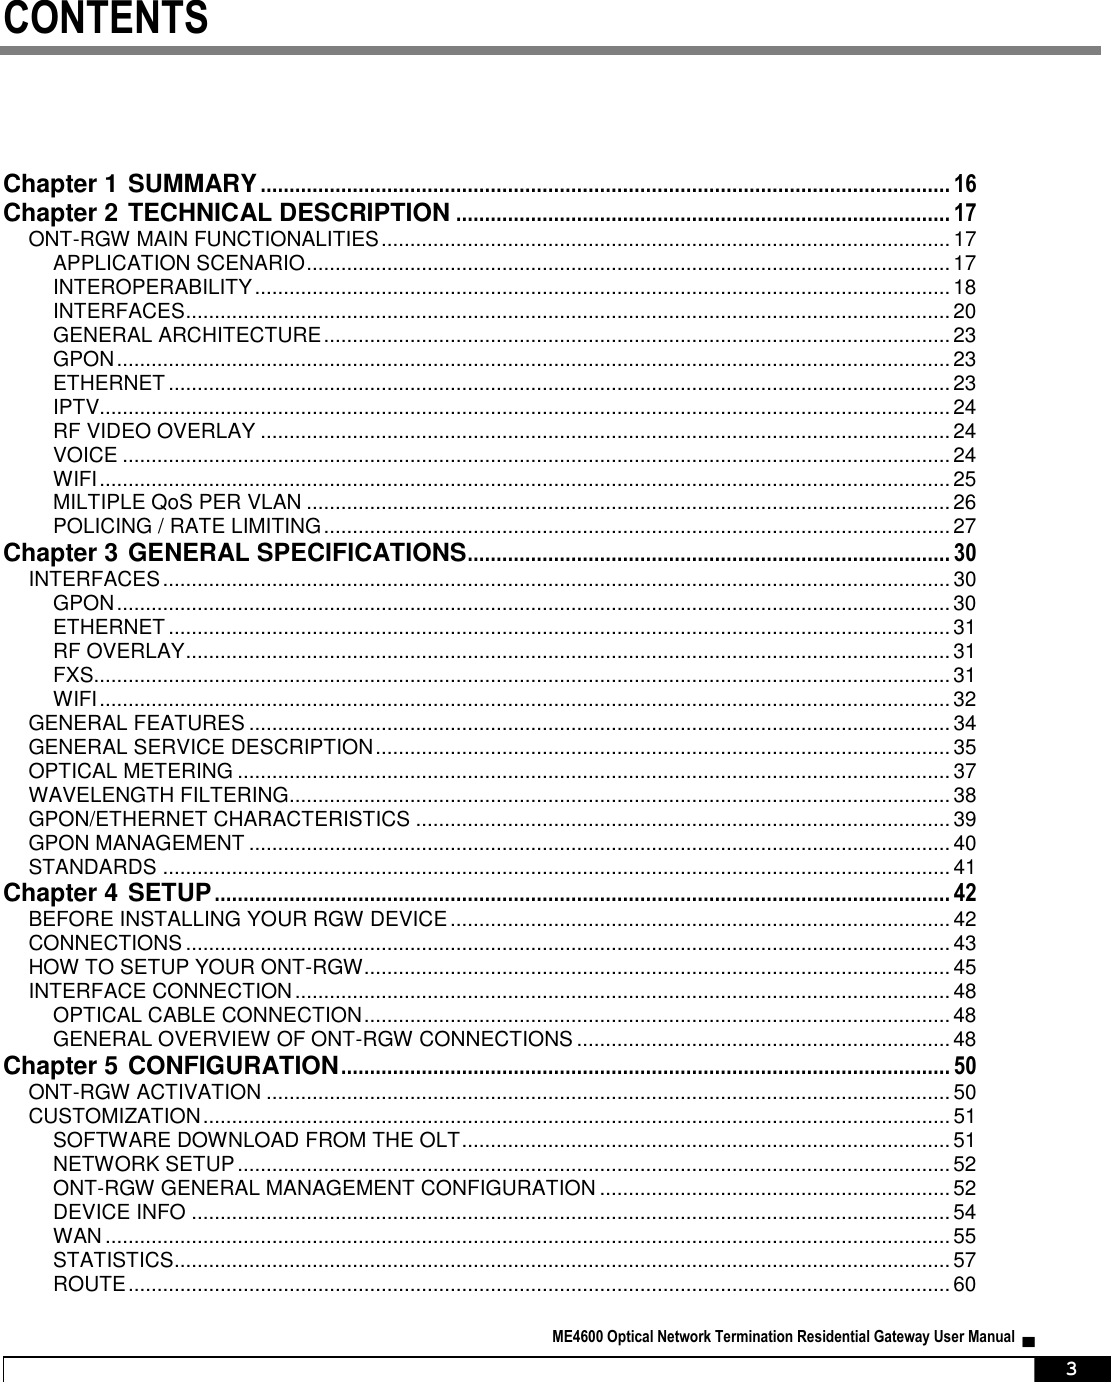  ME4600 Optical Network Termination Residential Gateway User Manual  ▄     3 CONTENTS Chapter 1 SUMMARY ........................................................................................................................ 16 Chapter 2 TECHNICAL DESCRIPTION ...................................................................................... 17 ONT-RGW MAIN FUNCTIONALITIES ................................................................................................... 17 APPLICATION SCENARIO ................................................................................................................ 17 INTEROPERABILITY ......................................................................................................................... 18 INTERFACES ..................................................................................................................................... 20 GENERAL ARCHITECTURE ............................................................................................................. 23 GPON ................................................................................................................................................. 23 ETHERNET ........................................................................................................................................ 23 IPTV.................................................................................................................................................... 24 RF VIDEO OVERLAY ........................................................................................................................ 24 VOICE ................................................................................................................................................ 24 WIFI .................................................................................................................................................... 25 MILTIPLE QoS PER VLAN ................................................................................................................ 26 POLICING / RATE LIMITING ............................................................................................................. 27 Chapter 3 GENERAL SPECIFICATIONS .................................................................................... 30 INTERFACES ......................................................................................................................................... 30 GPON ................................................................................................................................................. 30 ETHERNET ........................................................................................................................................ 31 RF OVERLAY ..................................................................................................................................... 31 FXS..................................................................................................................................................... 31 WIFI .................................................................................................................................................... 32 GENERAL FEATURES .......................................................................................................................... 34 GENERAL SERVICE DESCRIPTION .................................................................................................... 35 OPTICAL METERING ............................................................................................................................ 37 WAVELENGTH FILTERING................................................................................................................... 38 GPON/ETHERNET CHARACTERISTICS ............................................................................................. 39 GPON MANAGEMENT .......................................................................................................................... 40 STANDARDS ......................................................................................................................................... 41 Chapter 4 SETUP ................................................................................................................................ 42 BEFORE INSTALLING YOUR RGW DEVICE ....................................................................................... 42 CONNECTIONS ..................................................................................................................................... 43 HOW TO SETUP YOUR ONT-RGW ...................................................................................................... 45 INTERFACE CONNECTION .................................................................................................................. 48 OPTICAL CABLE CONNECTION ...................................................................................................... 48 GENERAL OVERVIEW OF ONT-RGW CONNECTIONS ................................................................. 48 Chapter 5 CONFIGURATION .......................................................................................................... 50 ONT-RGW ACTIVATION ....................................................................................................................... 50 CUSTOMIZATION .................................................................................................................................. 51 SOFTWARE DOWNLOAD FROM THE OLT ..................................................................................... 51 NETWORK SETUP ............................................................................................................................ 52 ONT-RGW GENERAL MANAGEMENT CONFIGURATION ............................................................. 52 DEVICE INFO .................................................................................................................................... 54 WAN ................................................................................................................................................... 55 STATISTICS ....................................................................................................................................... 57 ROUTE ............................................................................................................................................... 60 